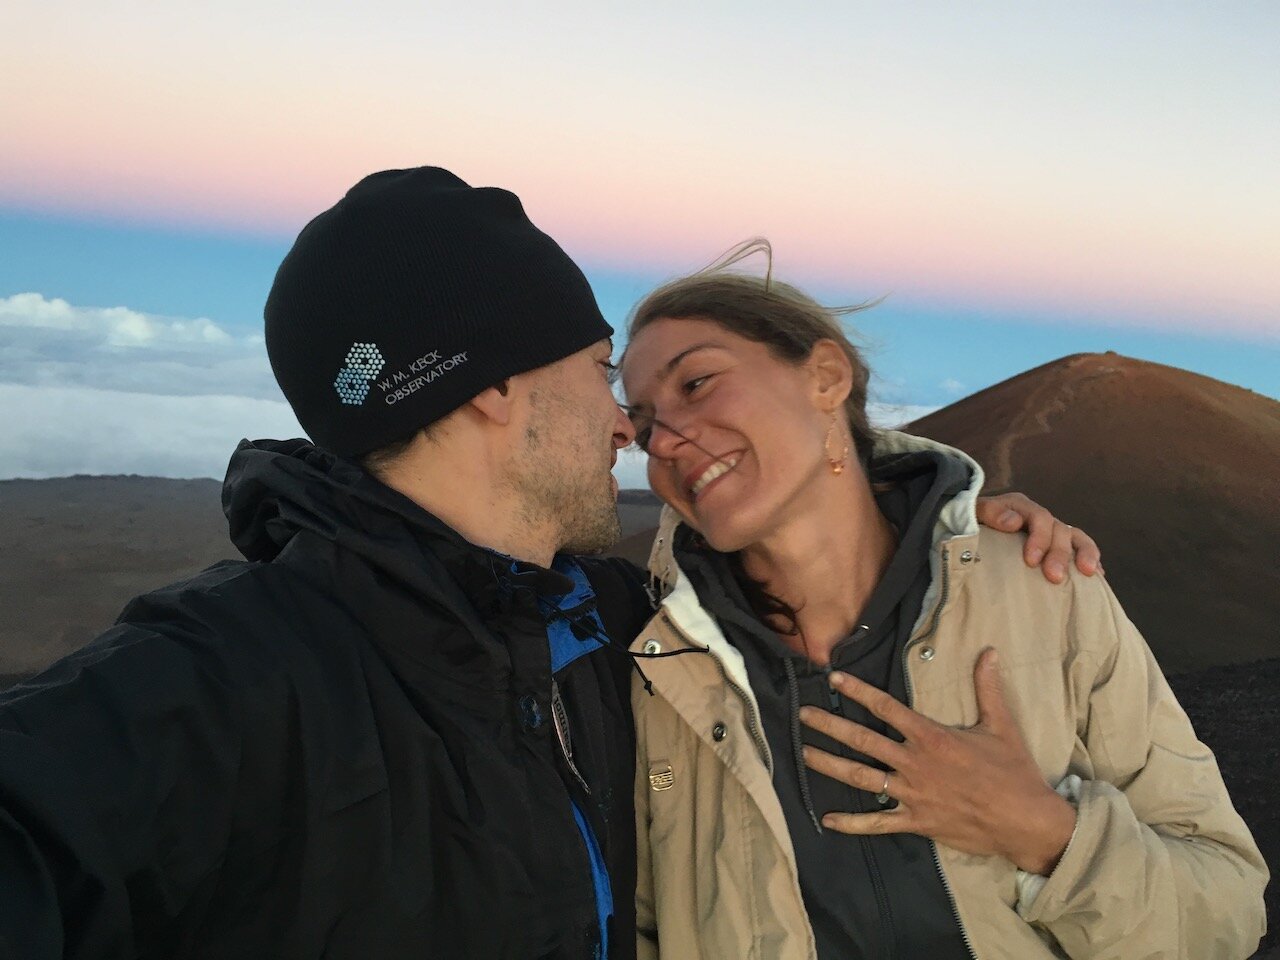   We returned to Hawaii in 2016 and celebrated our love by climbing Mauna Kea (13,800 feet above sea level) by car.  